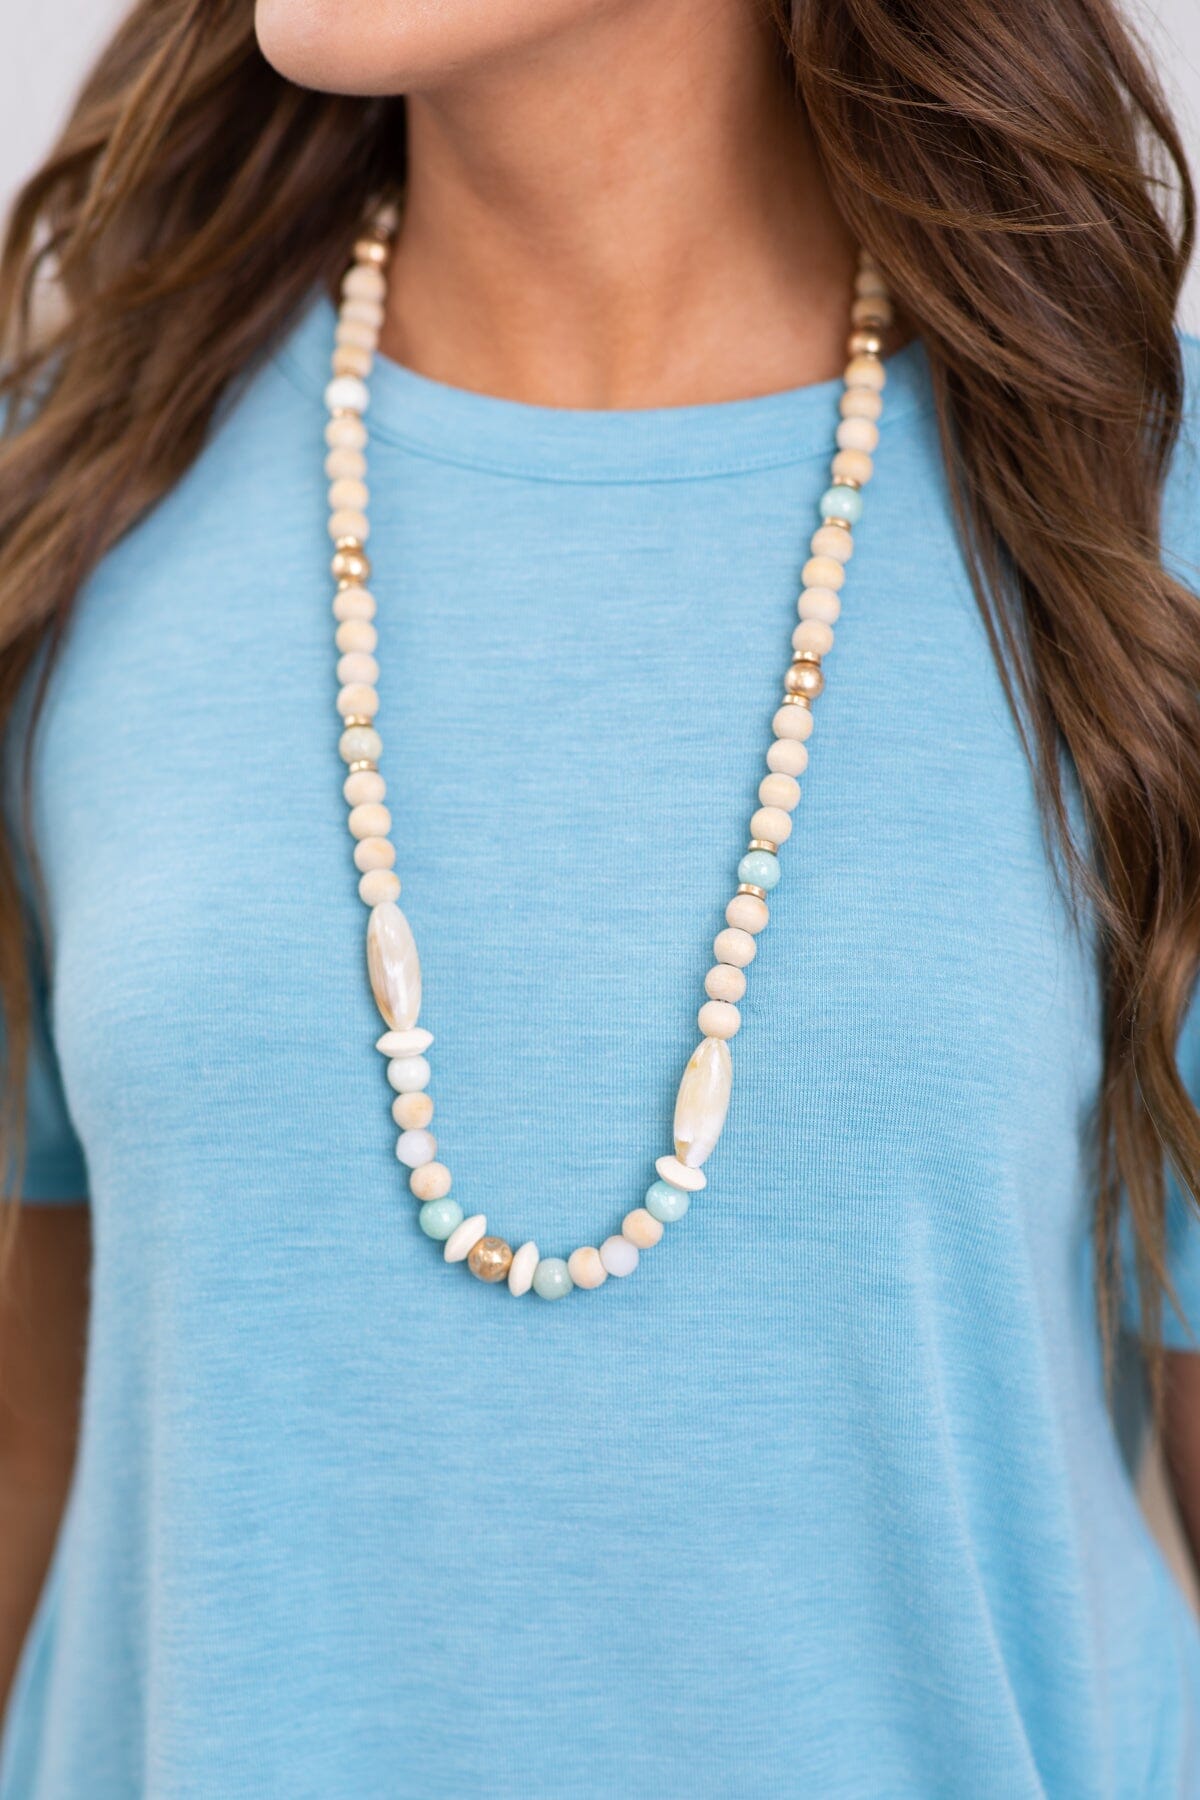 Beige and Mint Beaded Long Necklace - Filly Flair